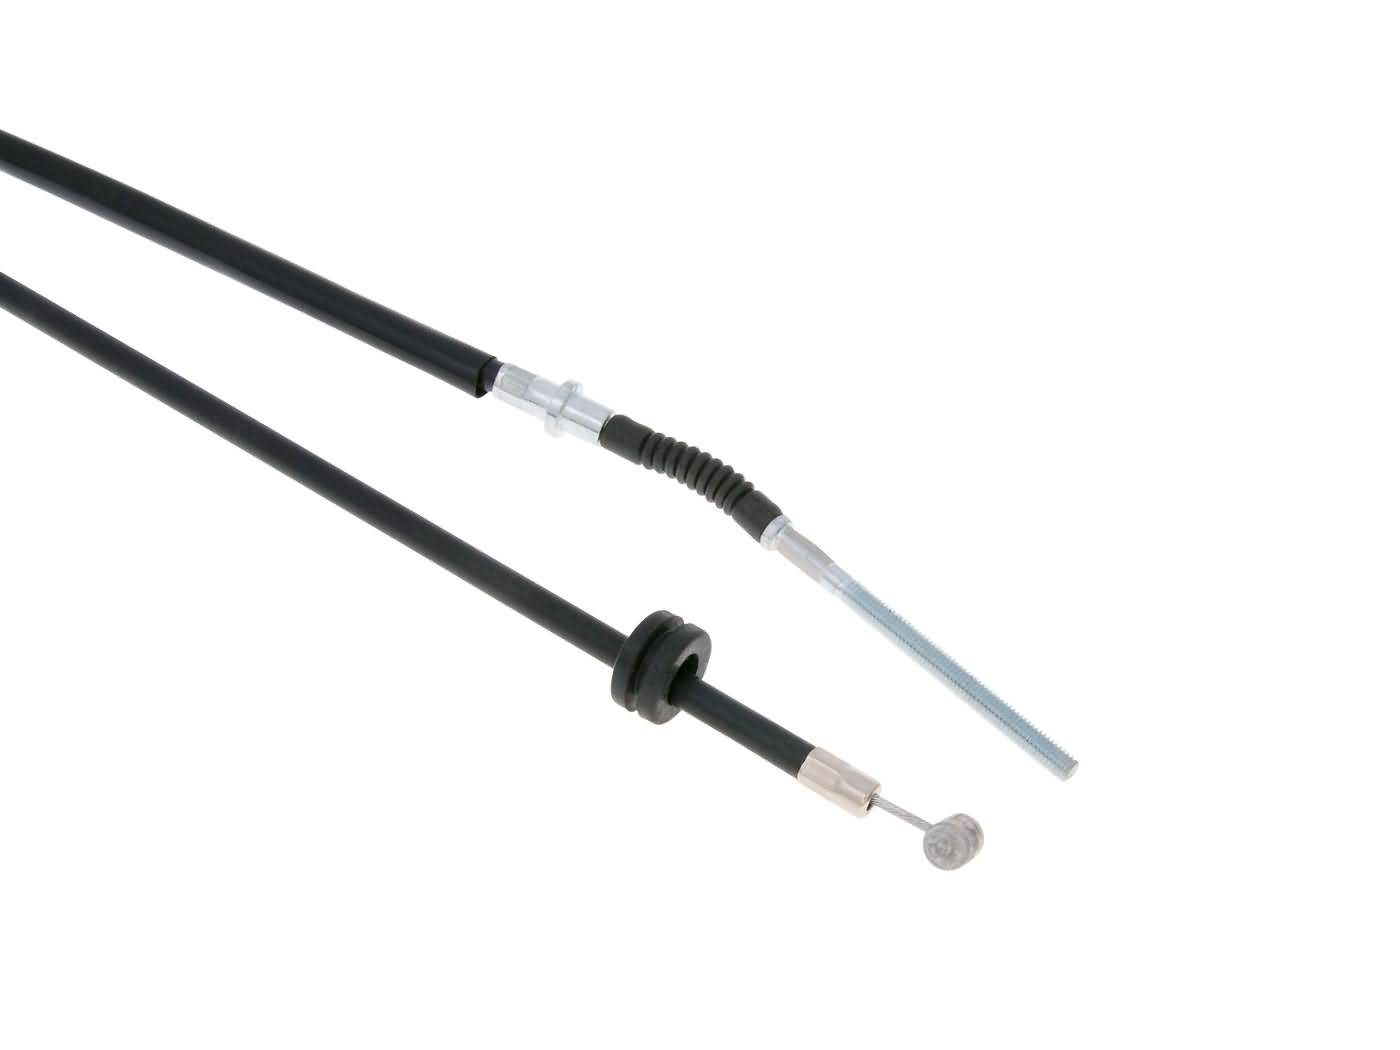 2EXTREME Rear Brake Cable Ptfe for Peugeot Speedfight 50 AC/LC Speedfight 3 50 AC 